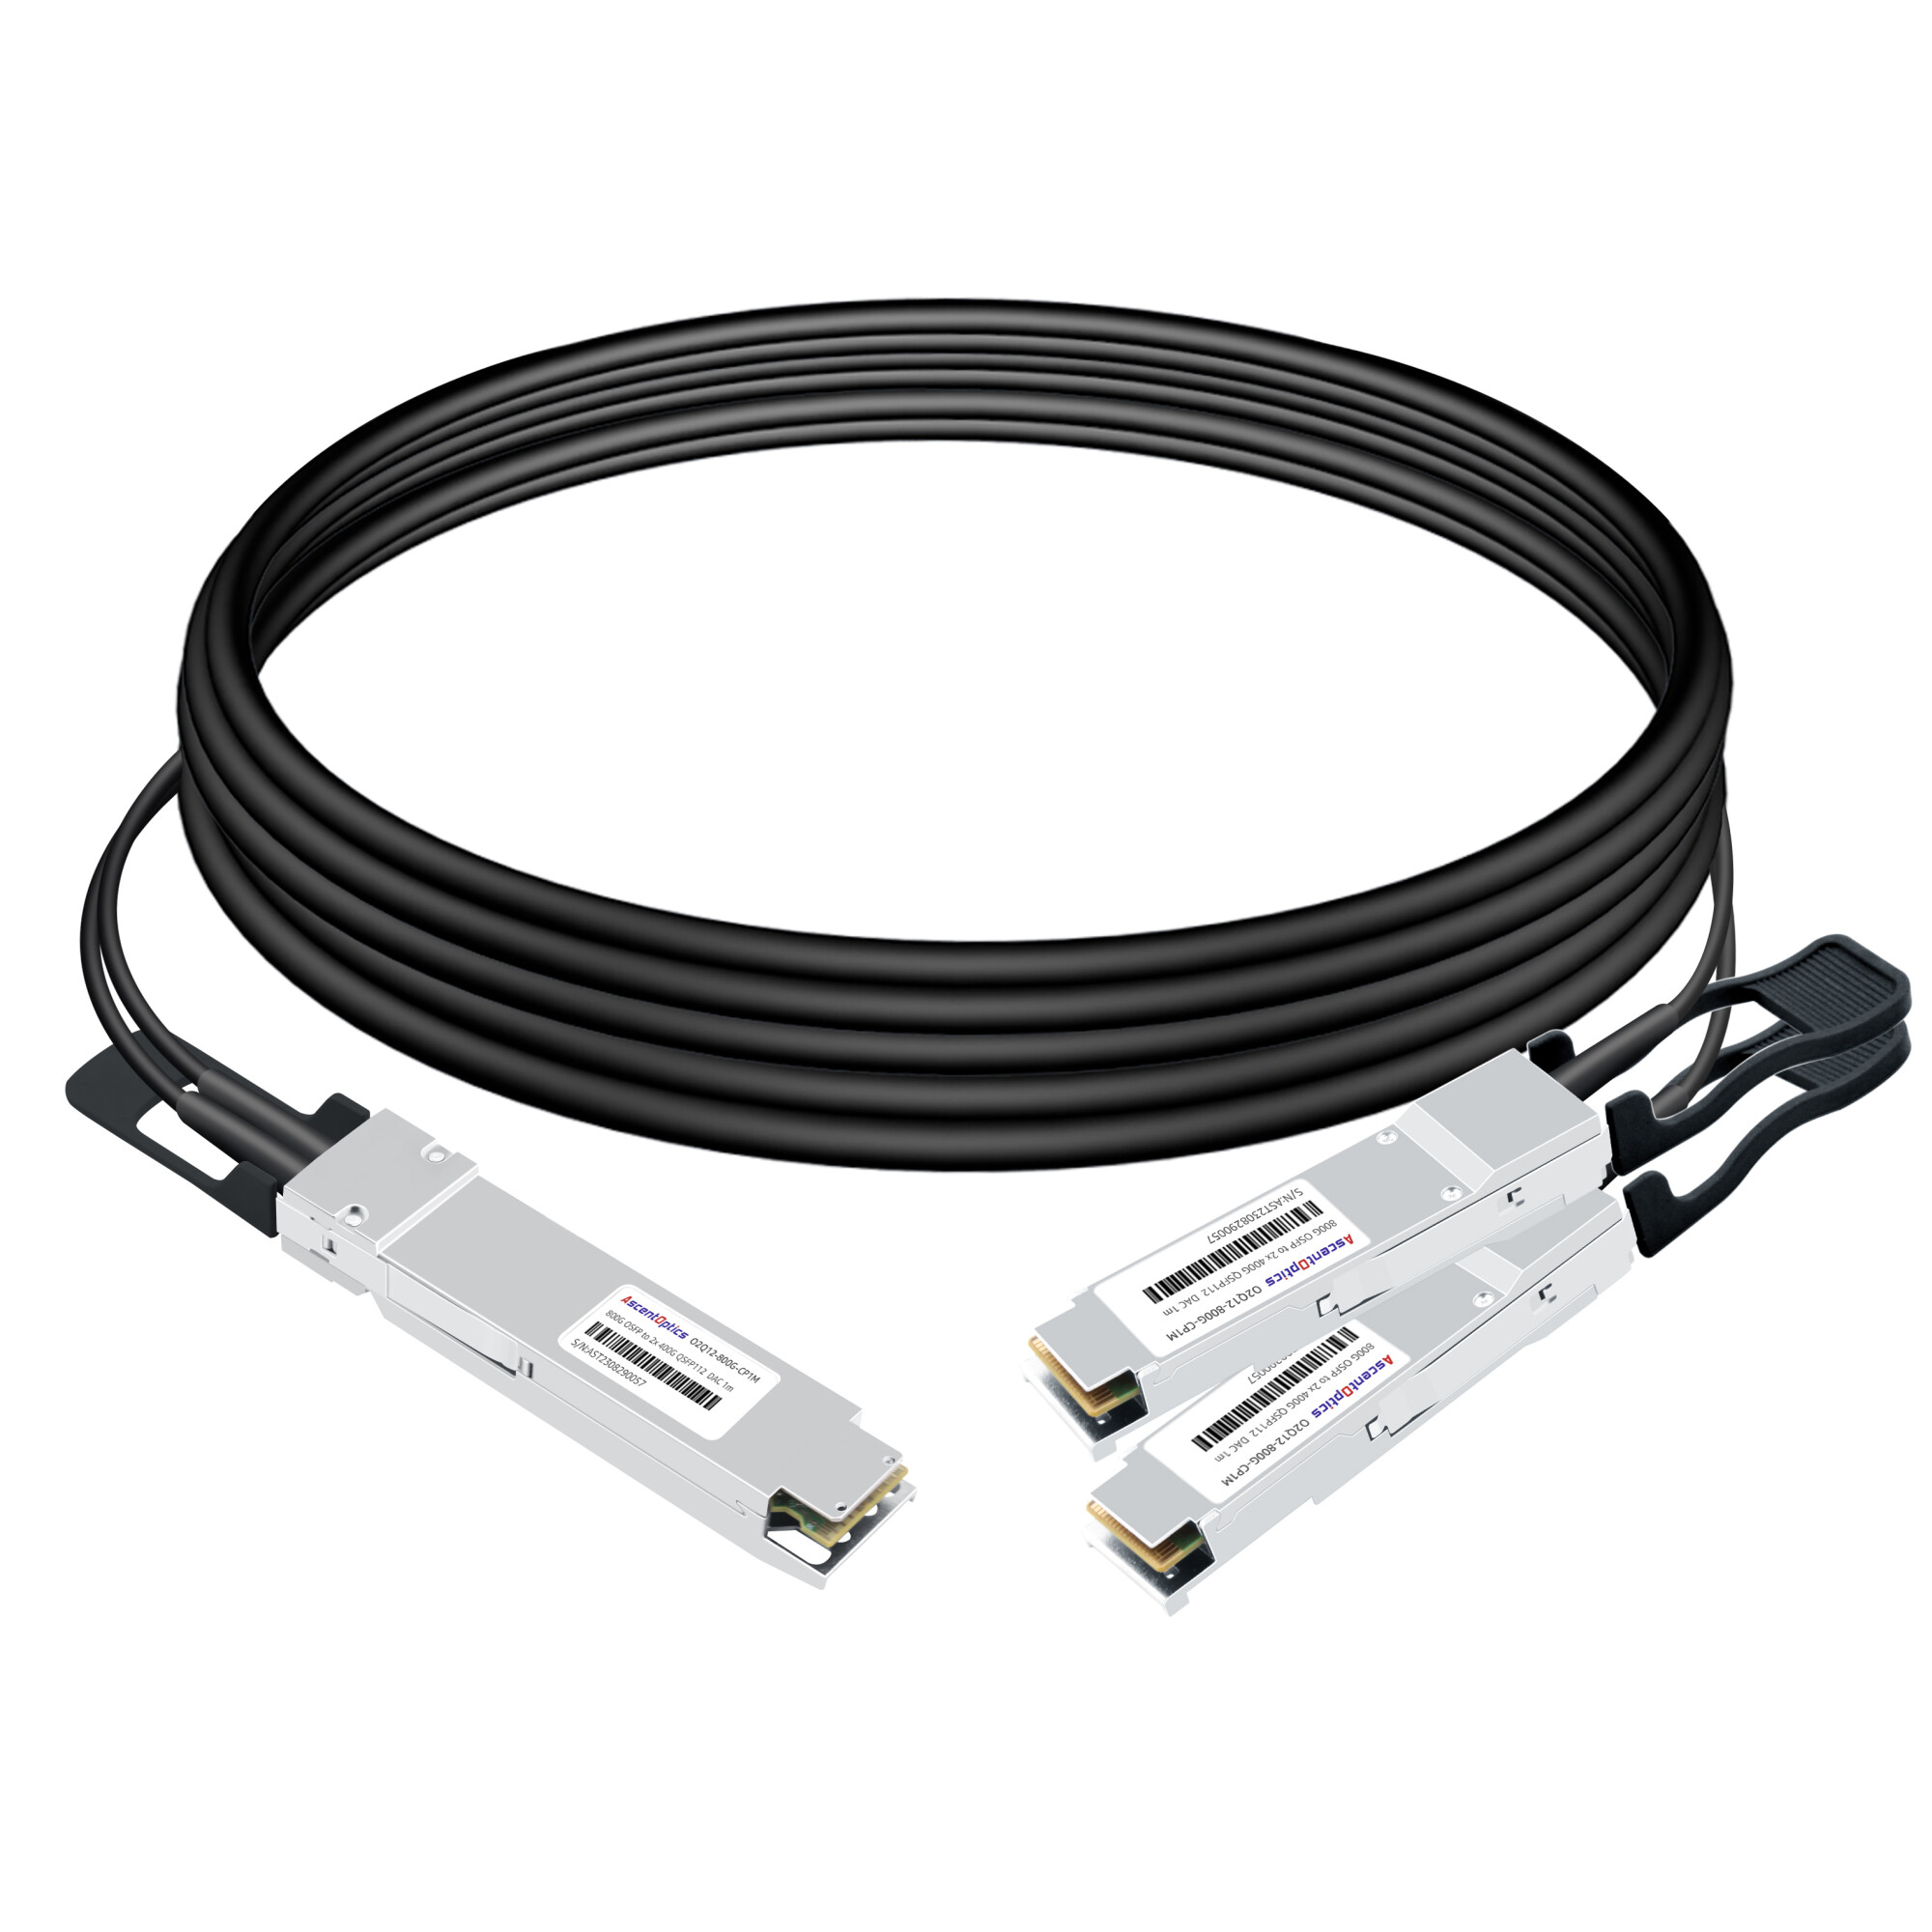 800G OSFP to 2x 400G QSFP112 Copper Breakout Cable,1 Meter